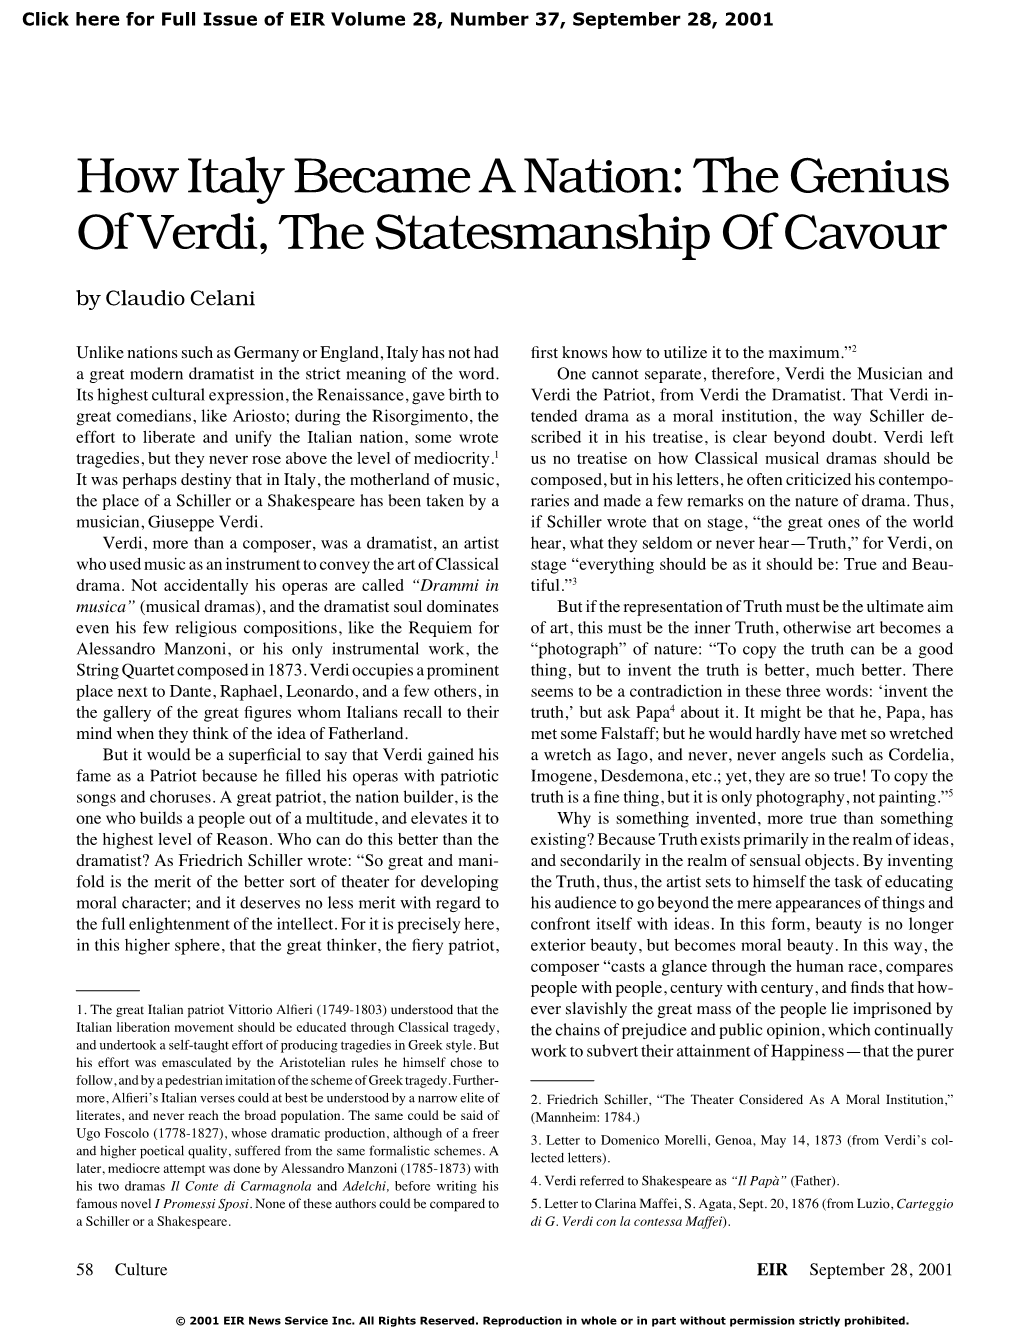 How Italy Became a Nation: the Genius of Verdi, the Statesmanship of Cavour